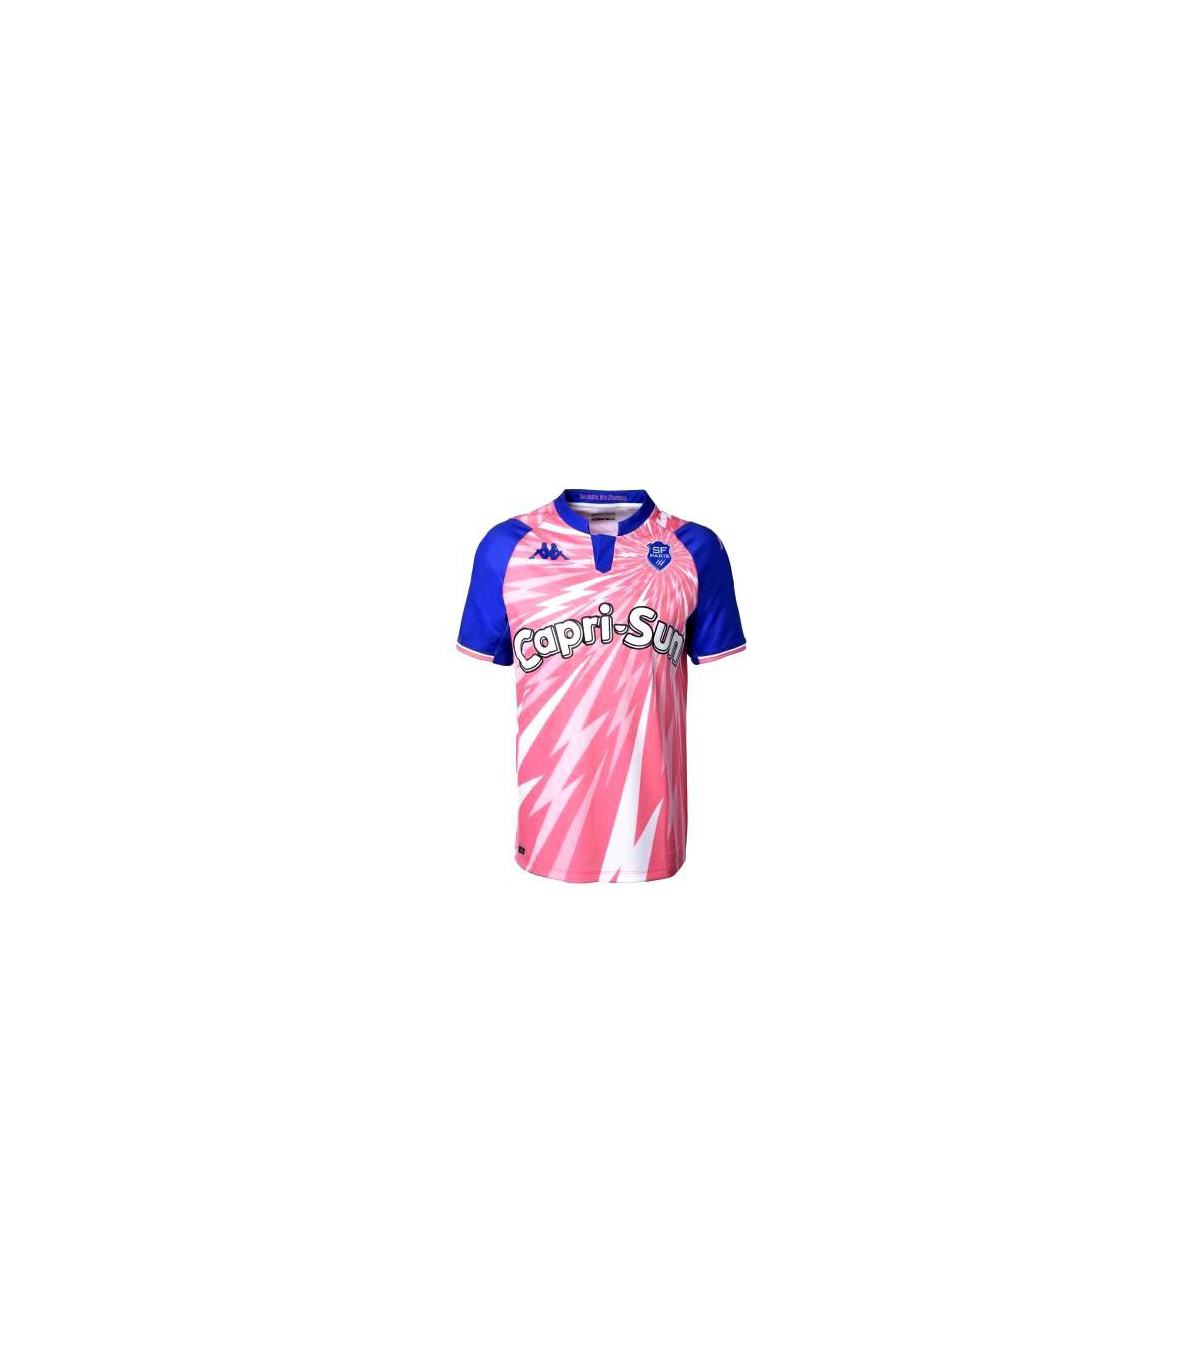 STADE FRANCAIS PARIS HOME RUGBY JERSEY 2021/2022 CHILD - KAPPA at s